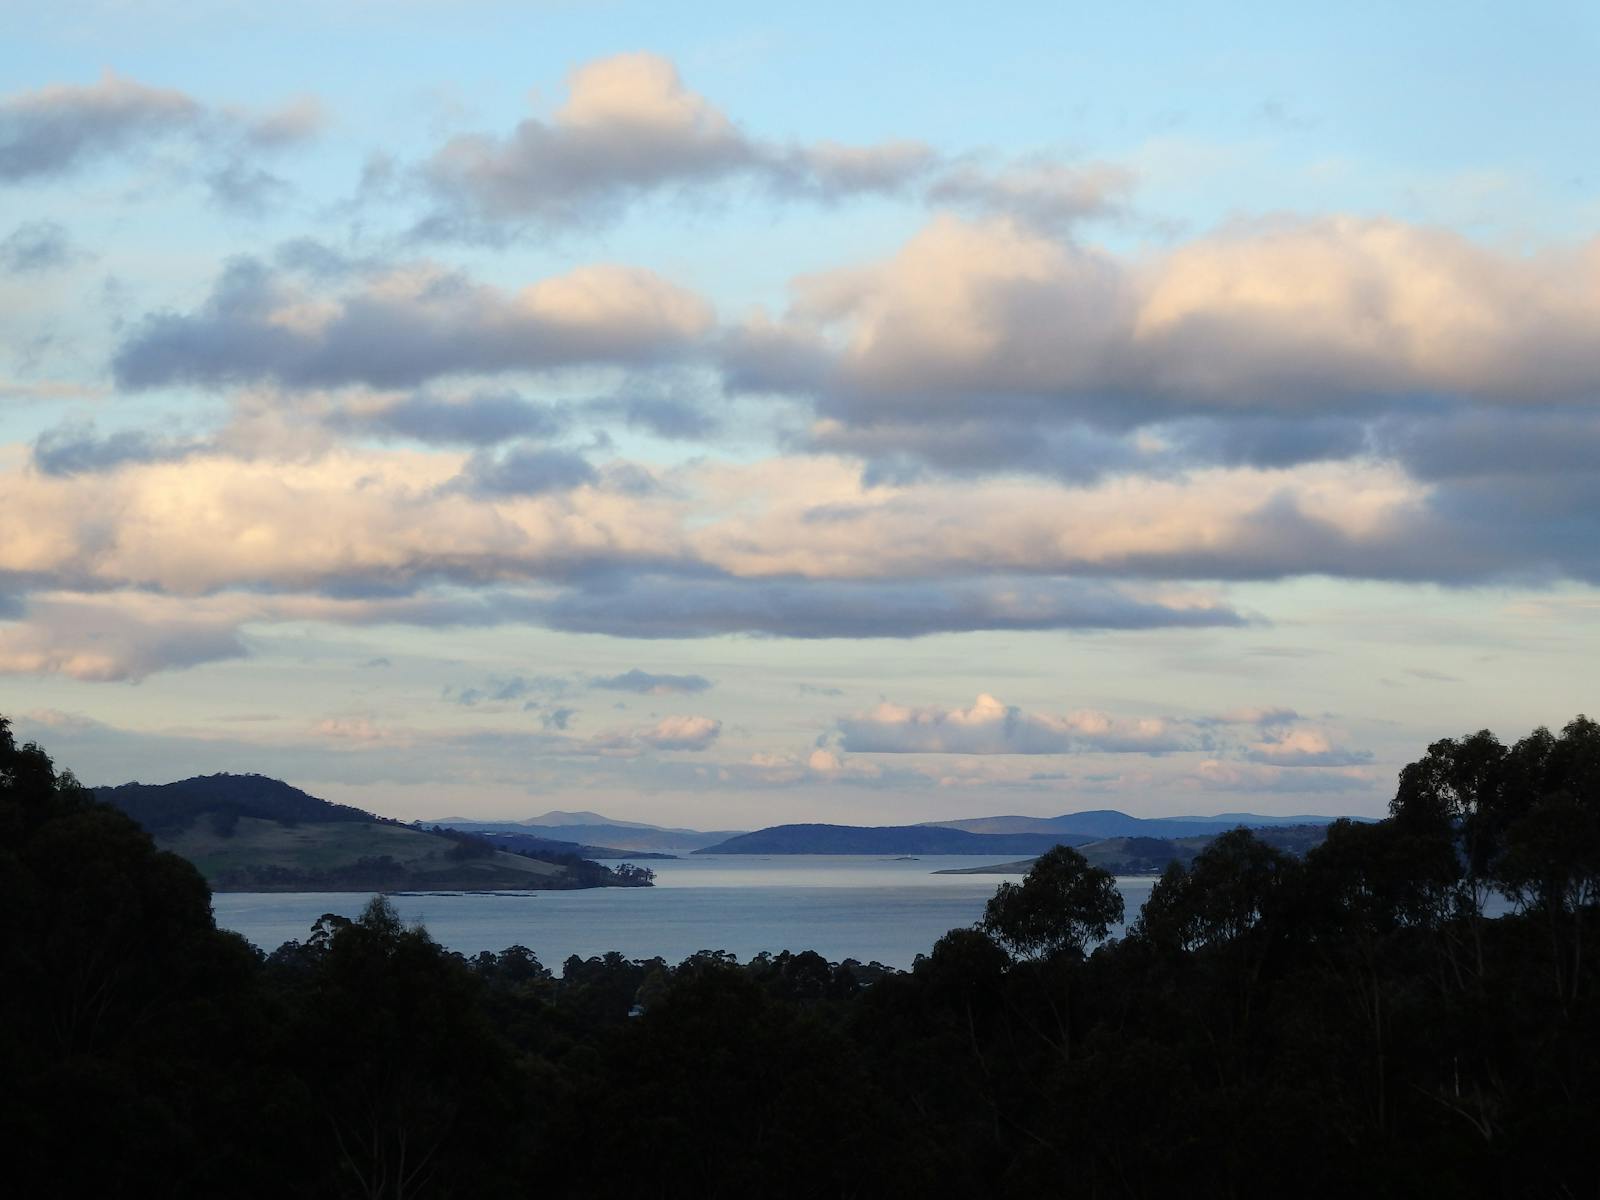 view of Storm Bay, trees in foreground, Tinderbox on left, Bruny Island on right